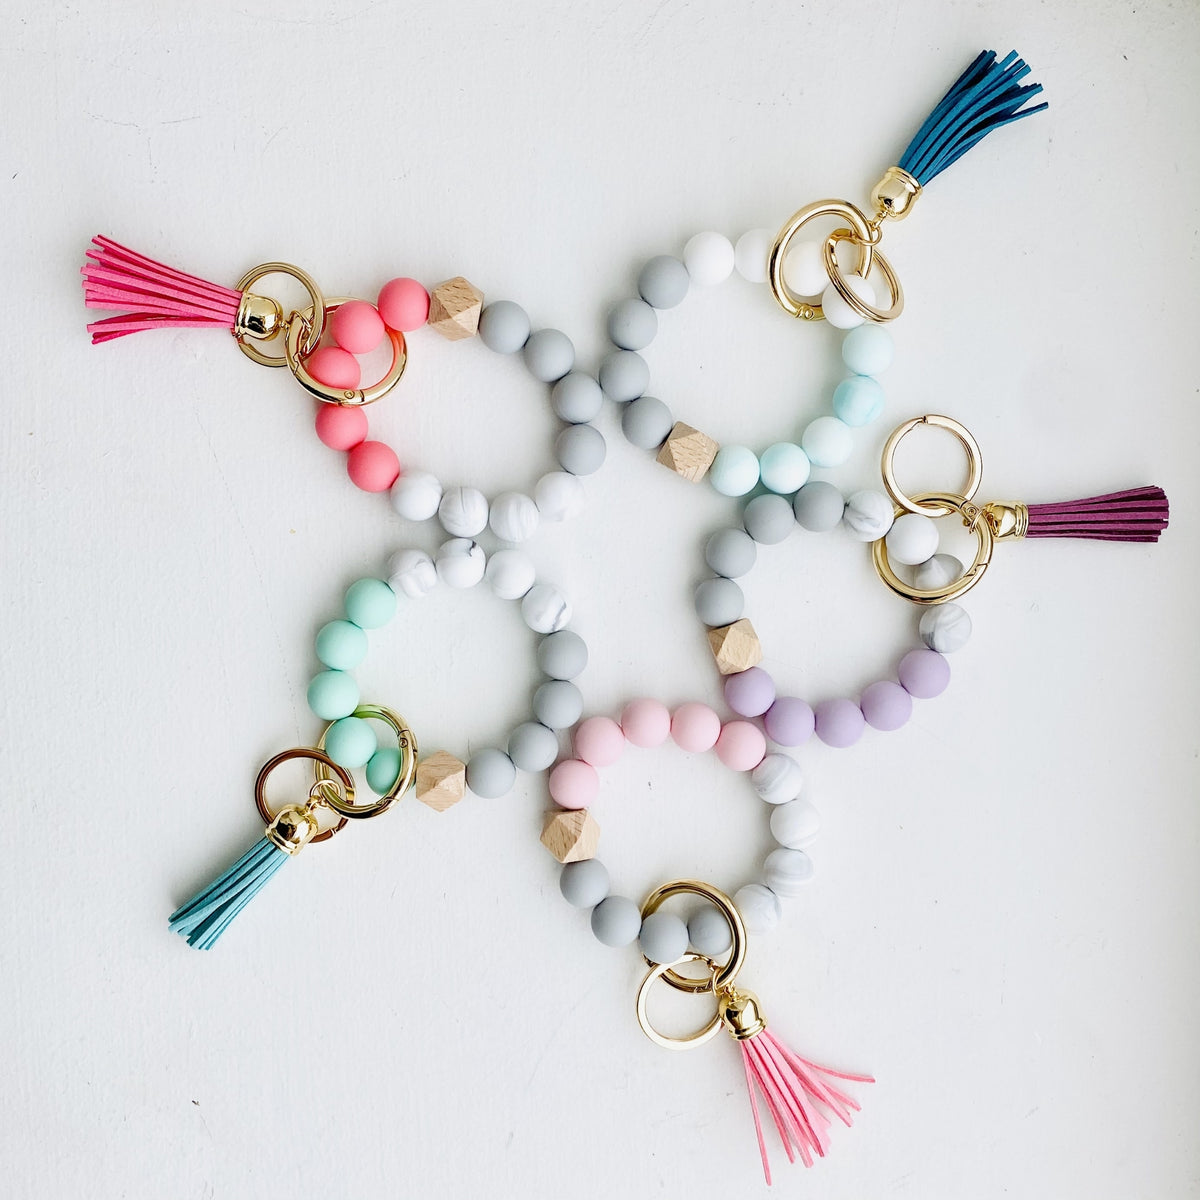 The Silicone Bead Store Keychain Hardware, Keychain Accessory Gold